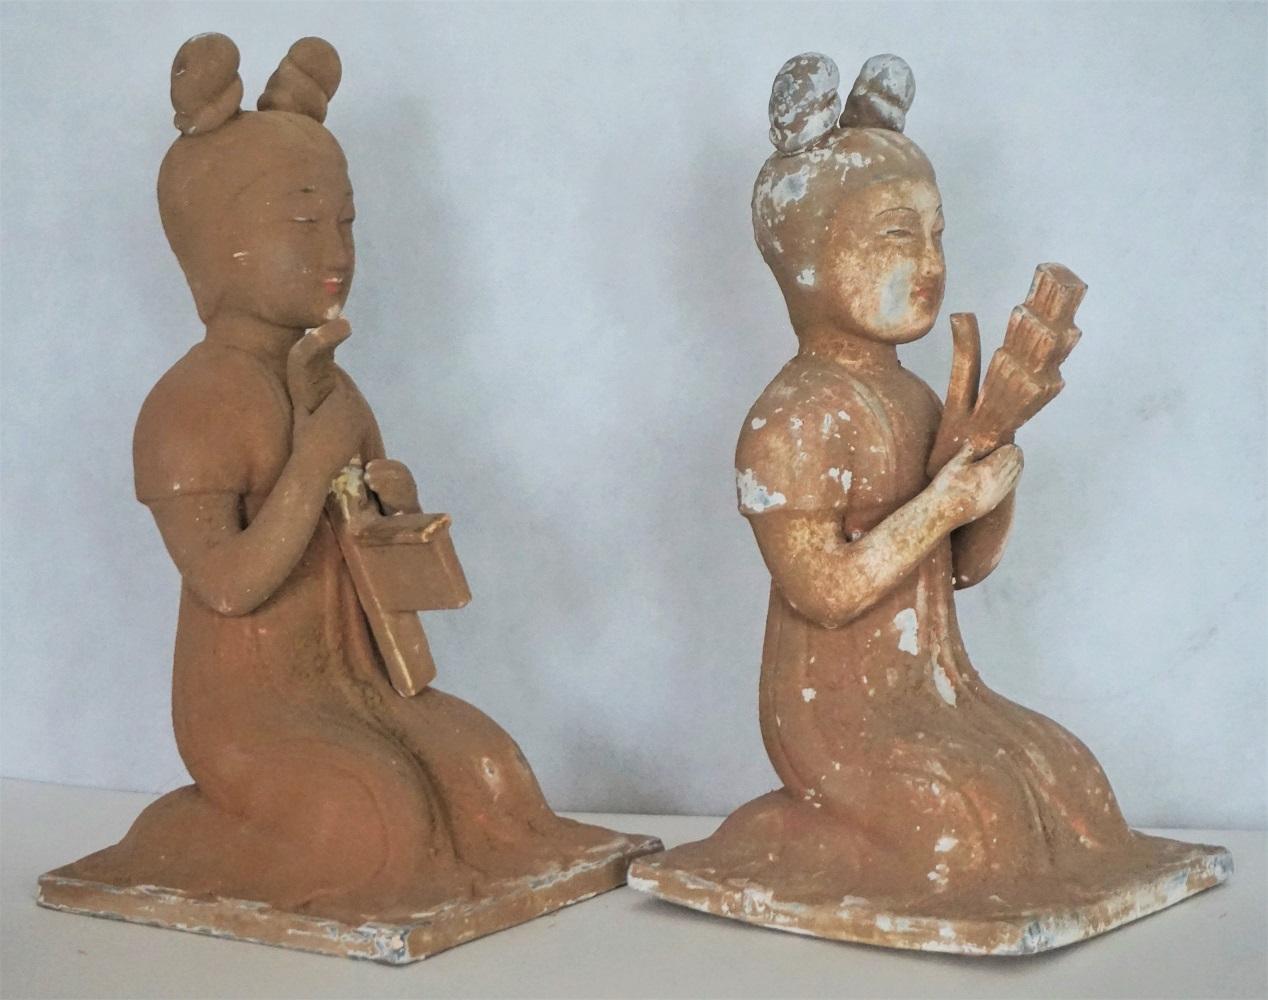 A pair of Japanese handmade terracotta female sculptures with musical instruments, early 20th century. These beautiful sculptures are for indoor and outdoor use.
Both pieces are in great vintage condition with some age-appropriate wear to the